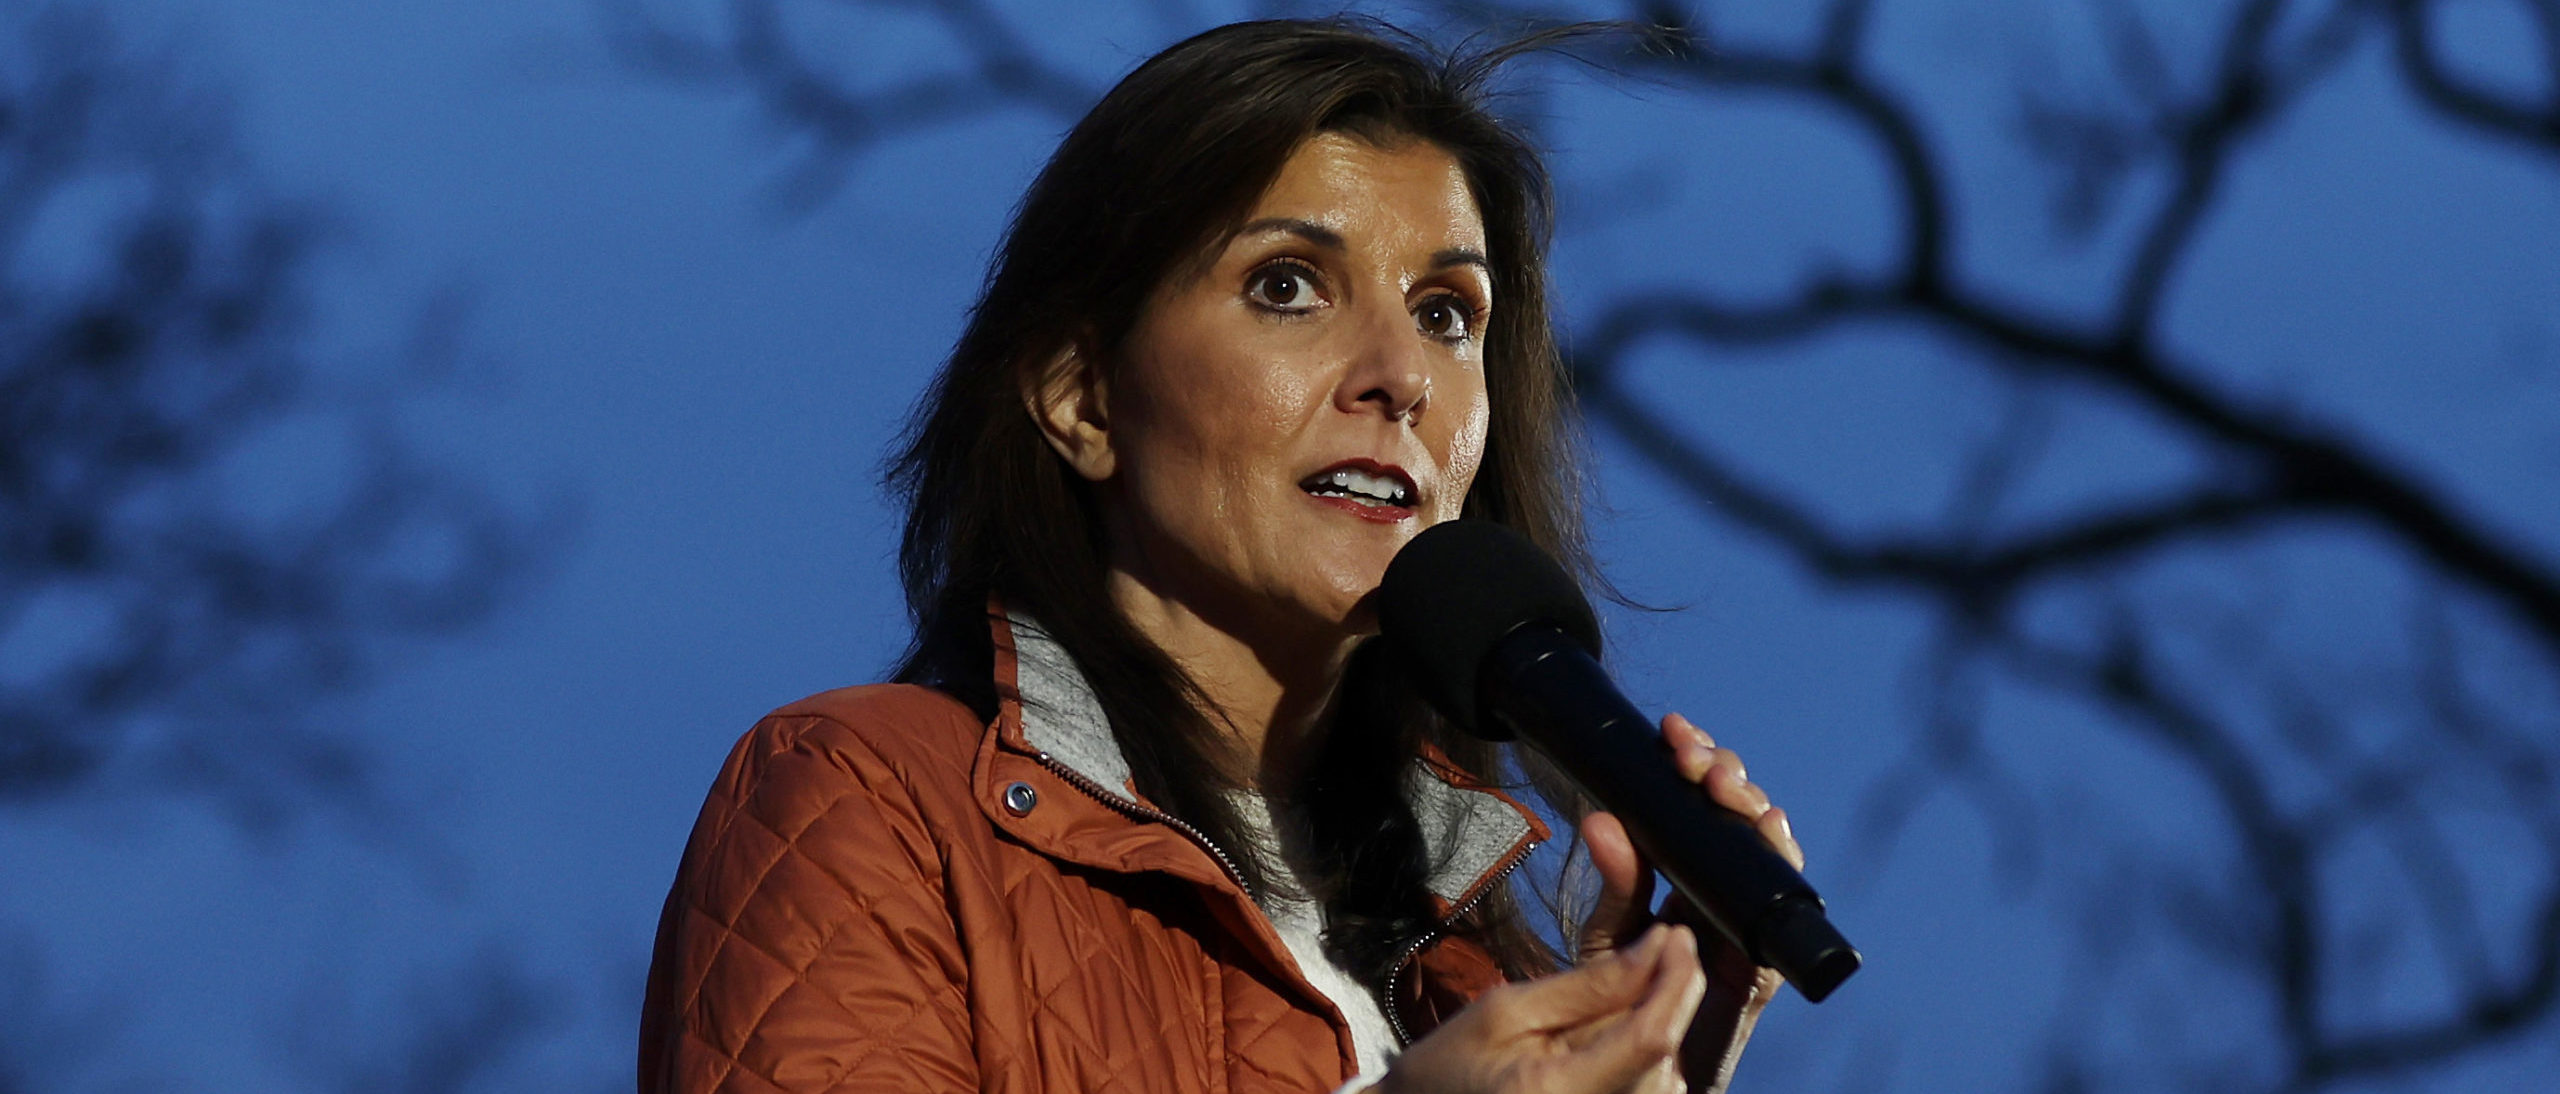 Trailing By Double Digits, Nikki Haley Makes Final Plea For Votes In Her Home State